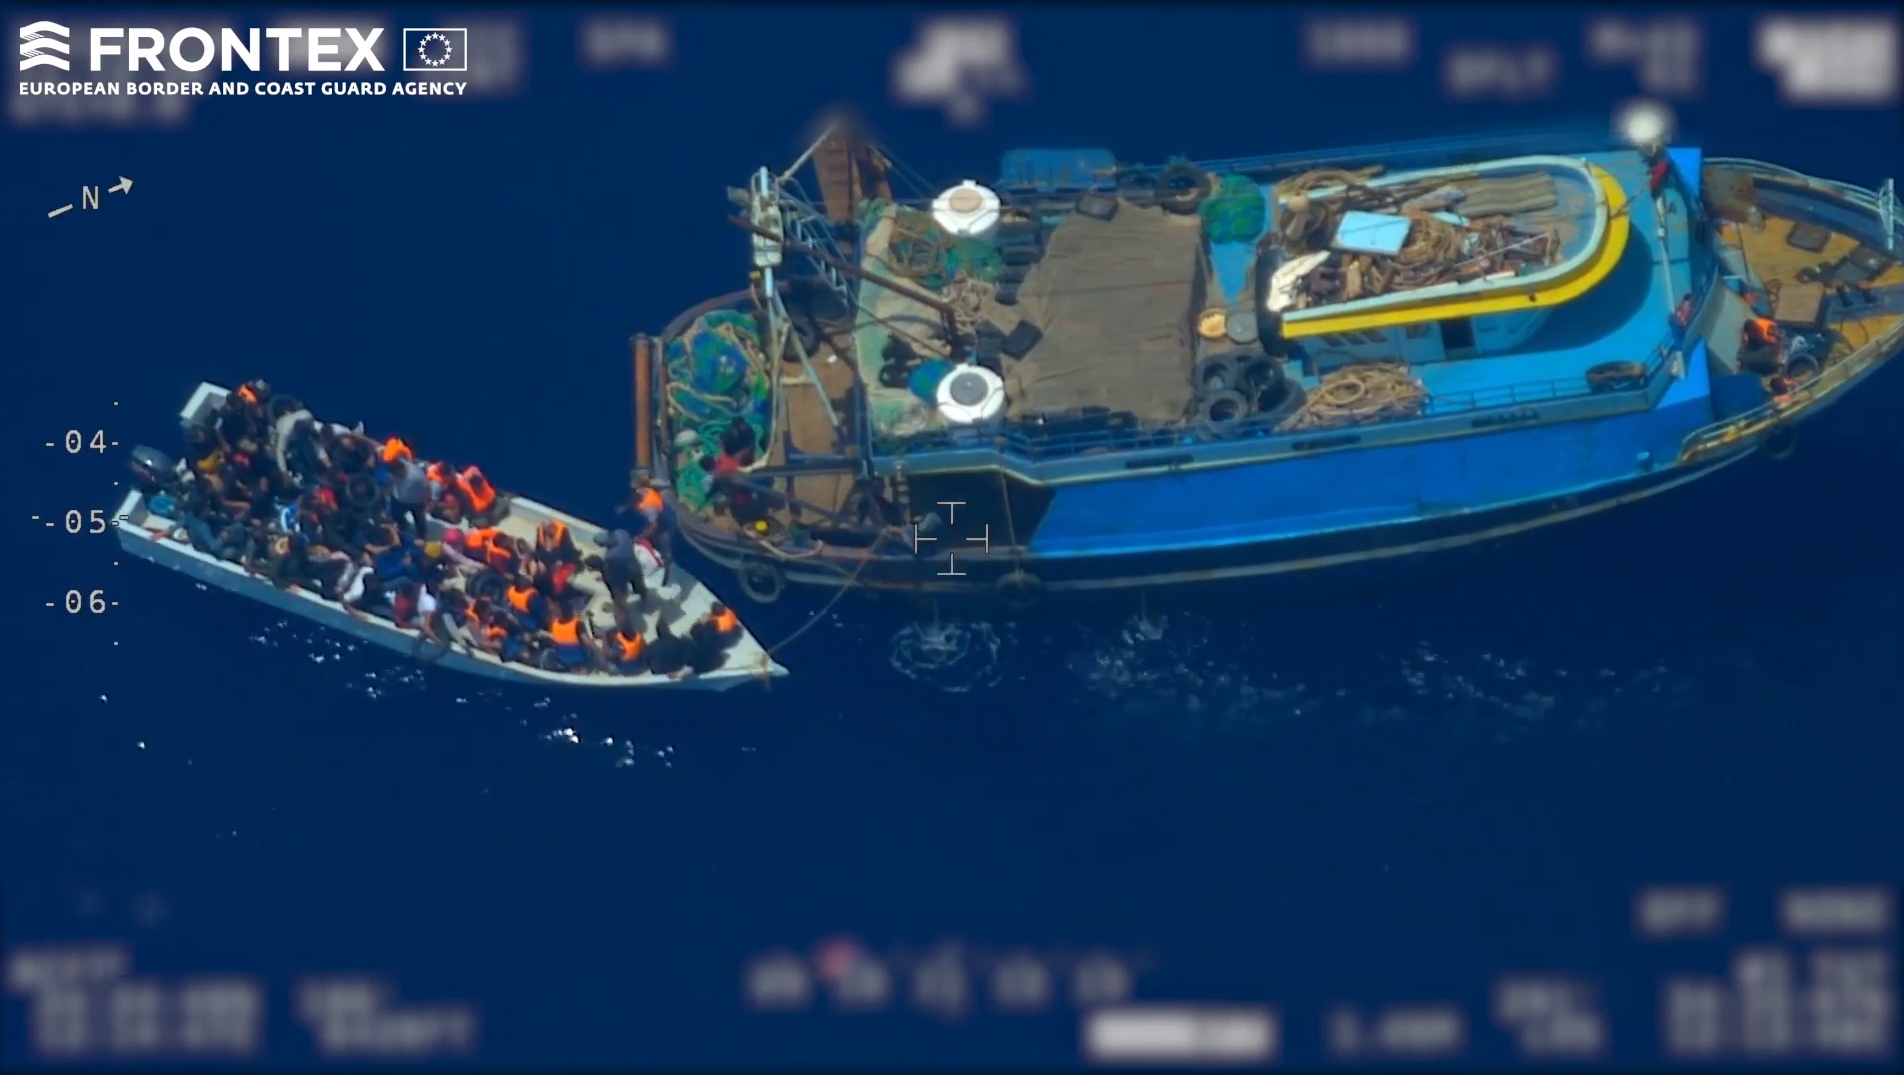 epa07669905 A screen grab taken from an undated handout video made available by the European Border and Coast Guard Agency (Frontex) on 24 June 2019 shows migrants coming out of from a fishing trawler (R) to board a wooden boat (L), at high seas in the Mediterranean. According to Frontex, some 80 people emerged from below the deck of the fishing trawler -- a so-called 'mother boat' that people smugglers use to carry large groups of migrants across the sea -- and got into the smaller boat. After the migrant boat was filled with people it slowly headed toward the Italian island of Lampedusa as the fishing trawler quickly moved away. Frontex said that it used a plane and a drone to observe the fishing trawler and the boat with migrants for several hours; it also alerted Italian and Maltese authorities and the EUNAVFOR Med (Operation Sophia). Italian authorities, who are investigating the case, started a complex operation that caught up with the bigger vessel and arrested the suspected people smugglers and the migrant boat was intercepted in the Italian waters.  EPA/FRONTEX, THE EUROPEAN BORDER AND COAST GUARD AGENCY HANDOUT  HANDOUT EDITORIAL USE ONLY/NO SALES